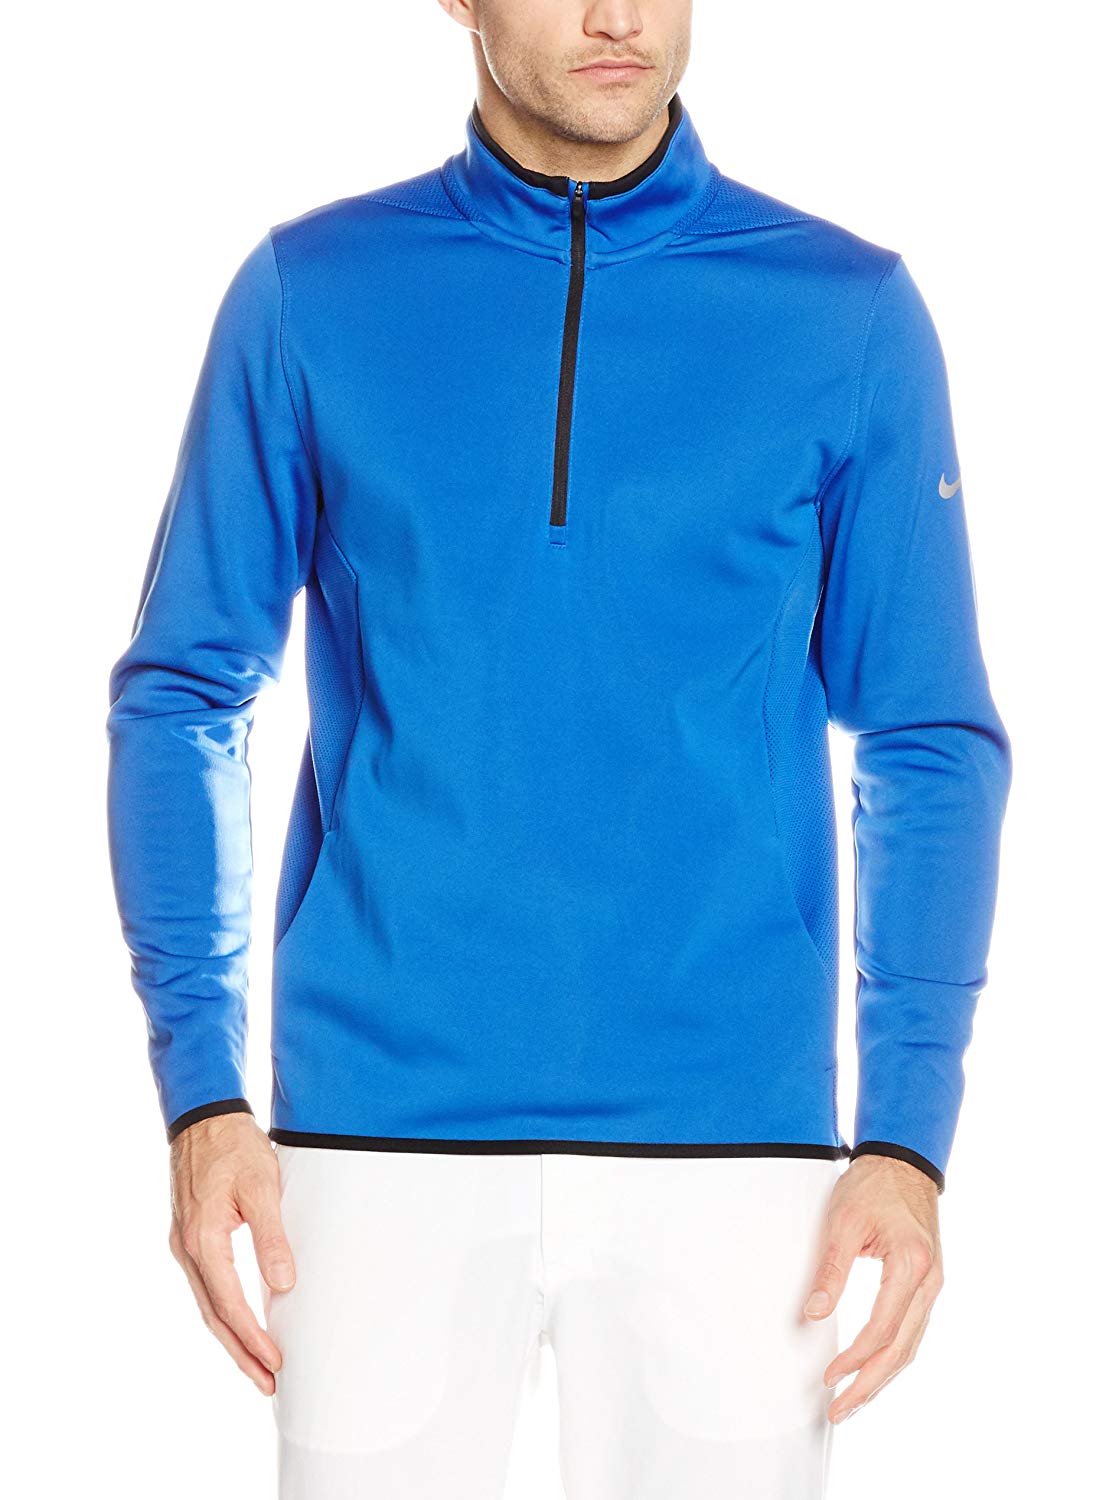 Buy Nike Mens Golf Pullovers for Best Prices Online!